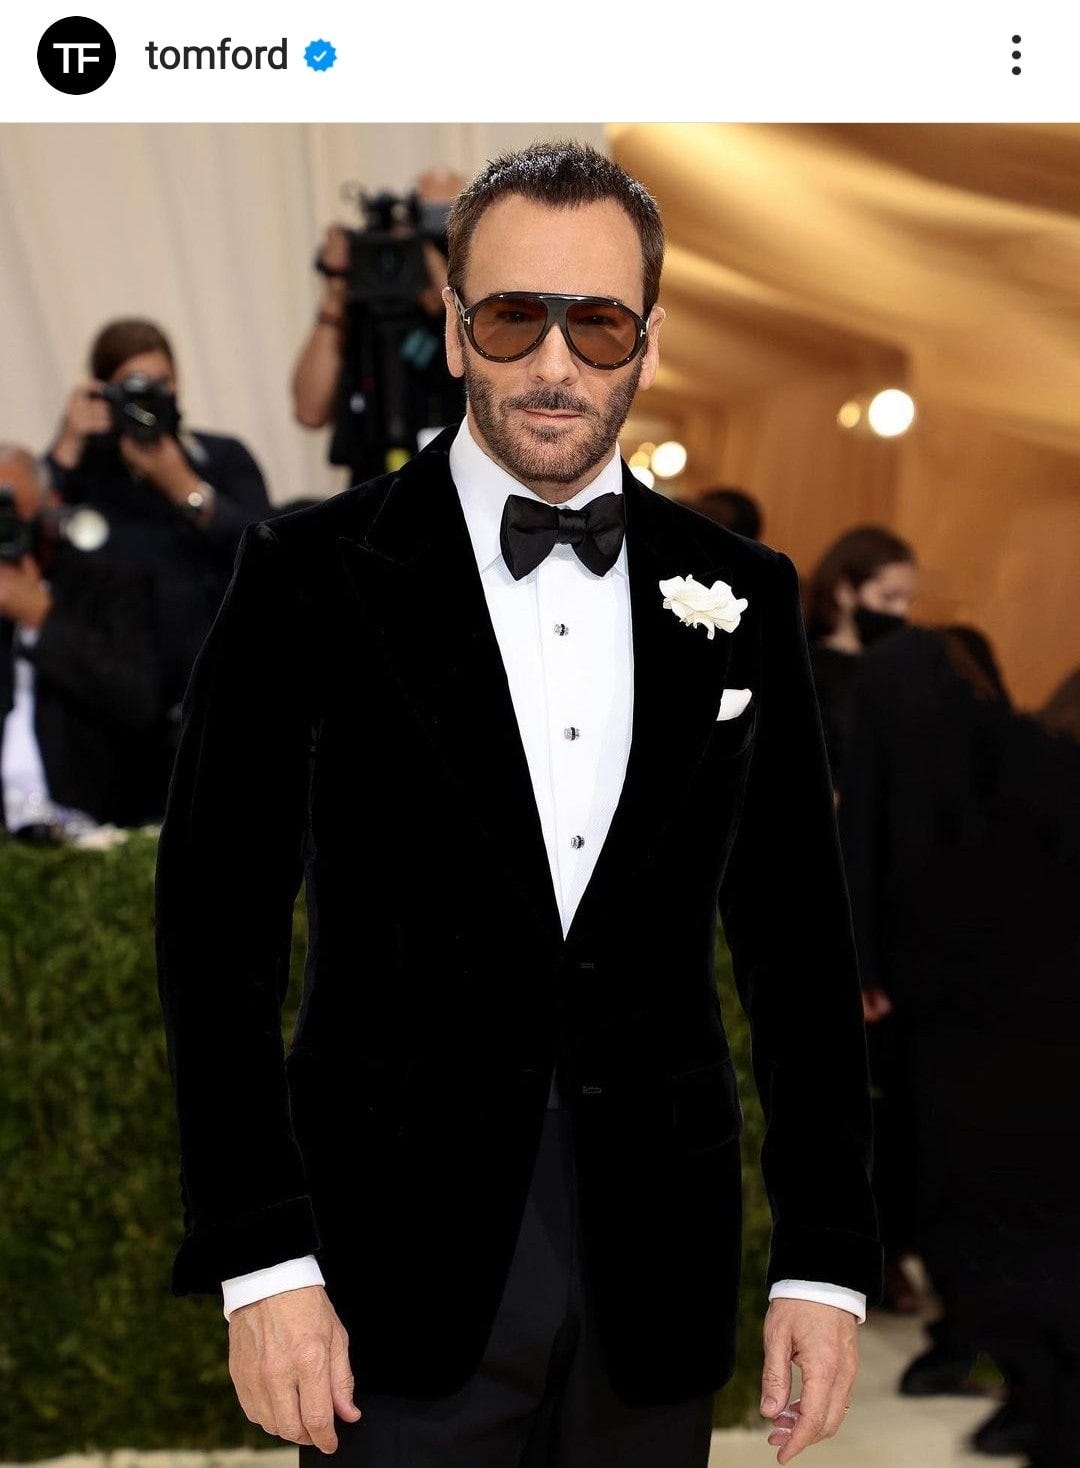 5 Lessons In Confidence And Style From Tom Ford's MET Gala Look | by James  Michael Sama | Medium